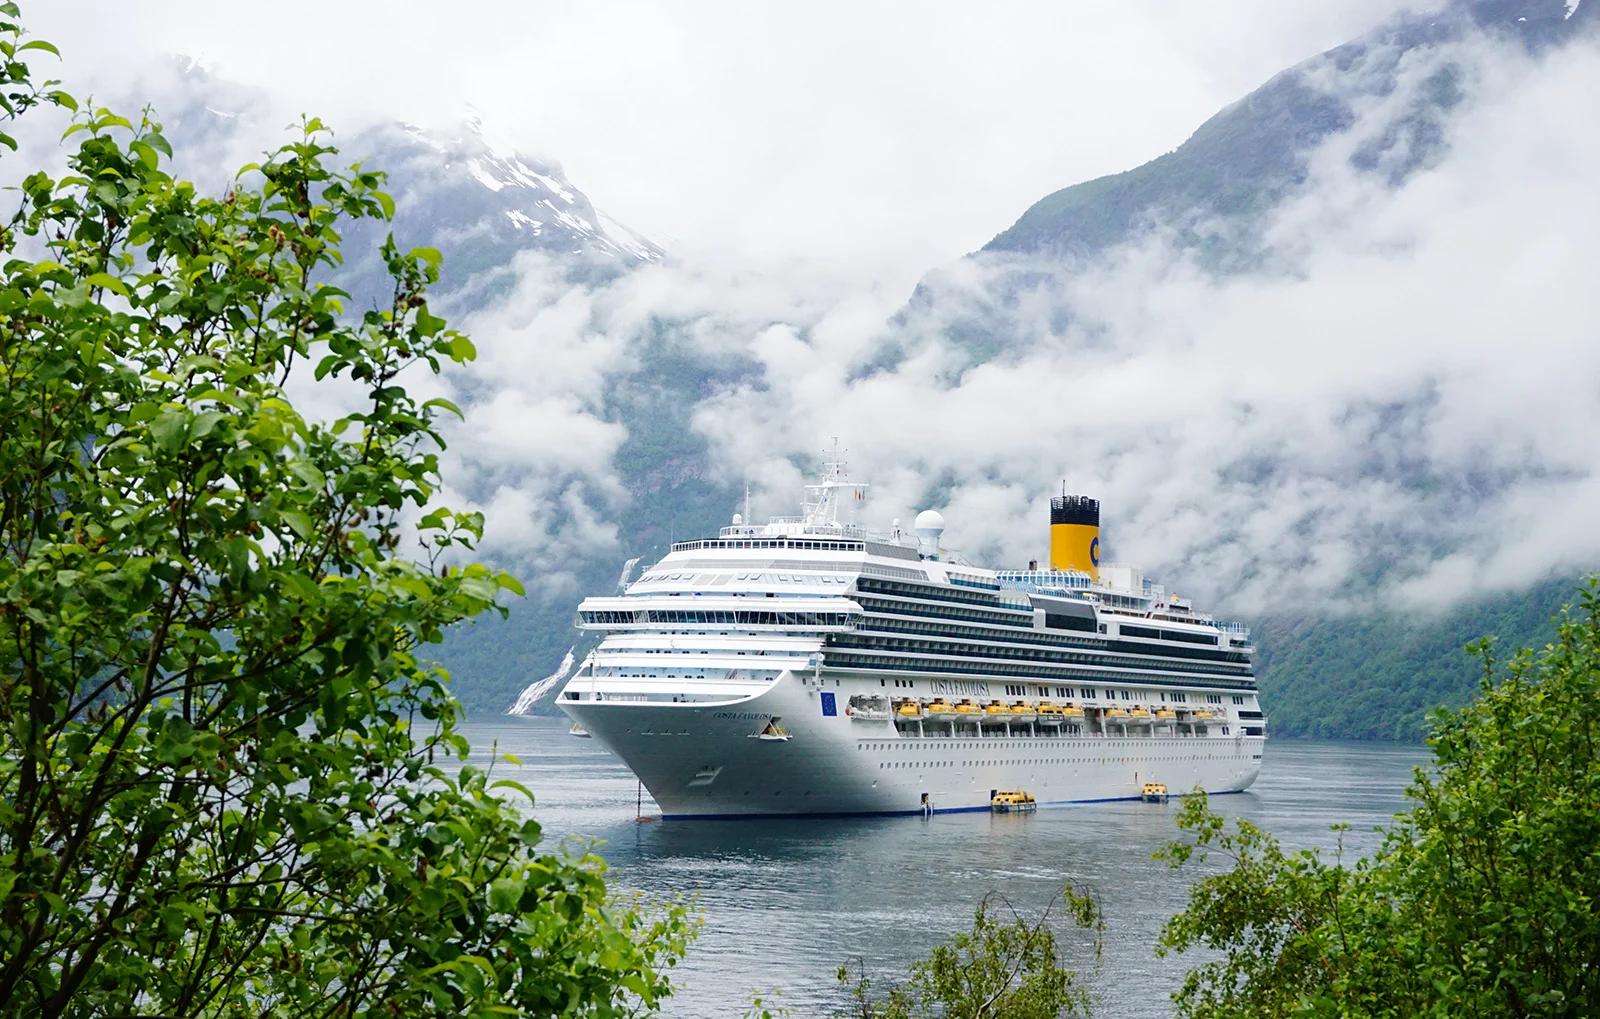 A cruise ship in Norway fjord